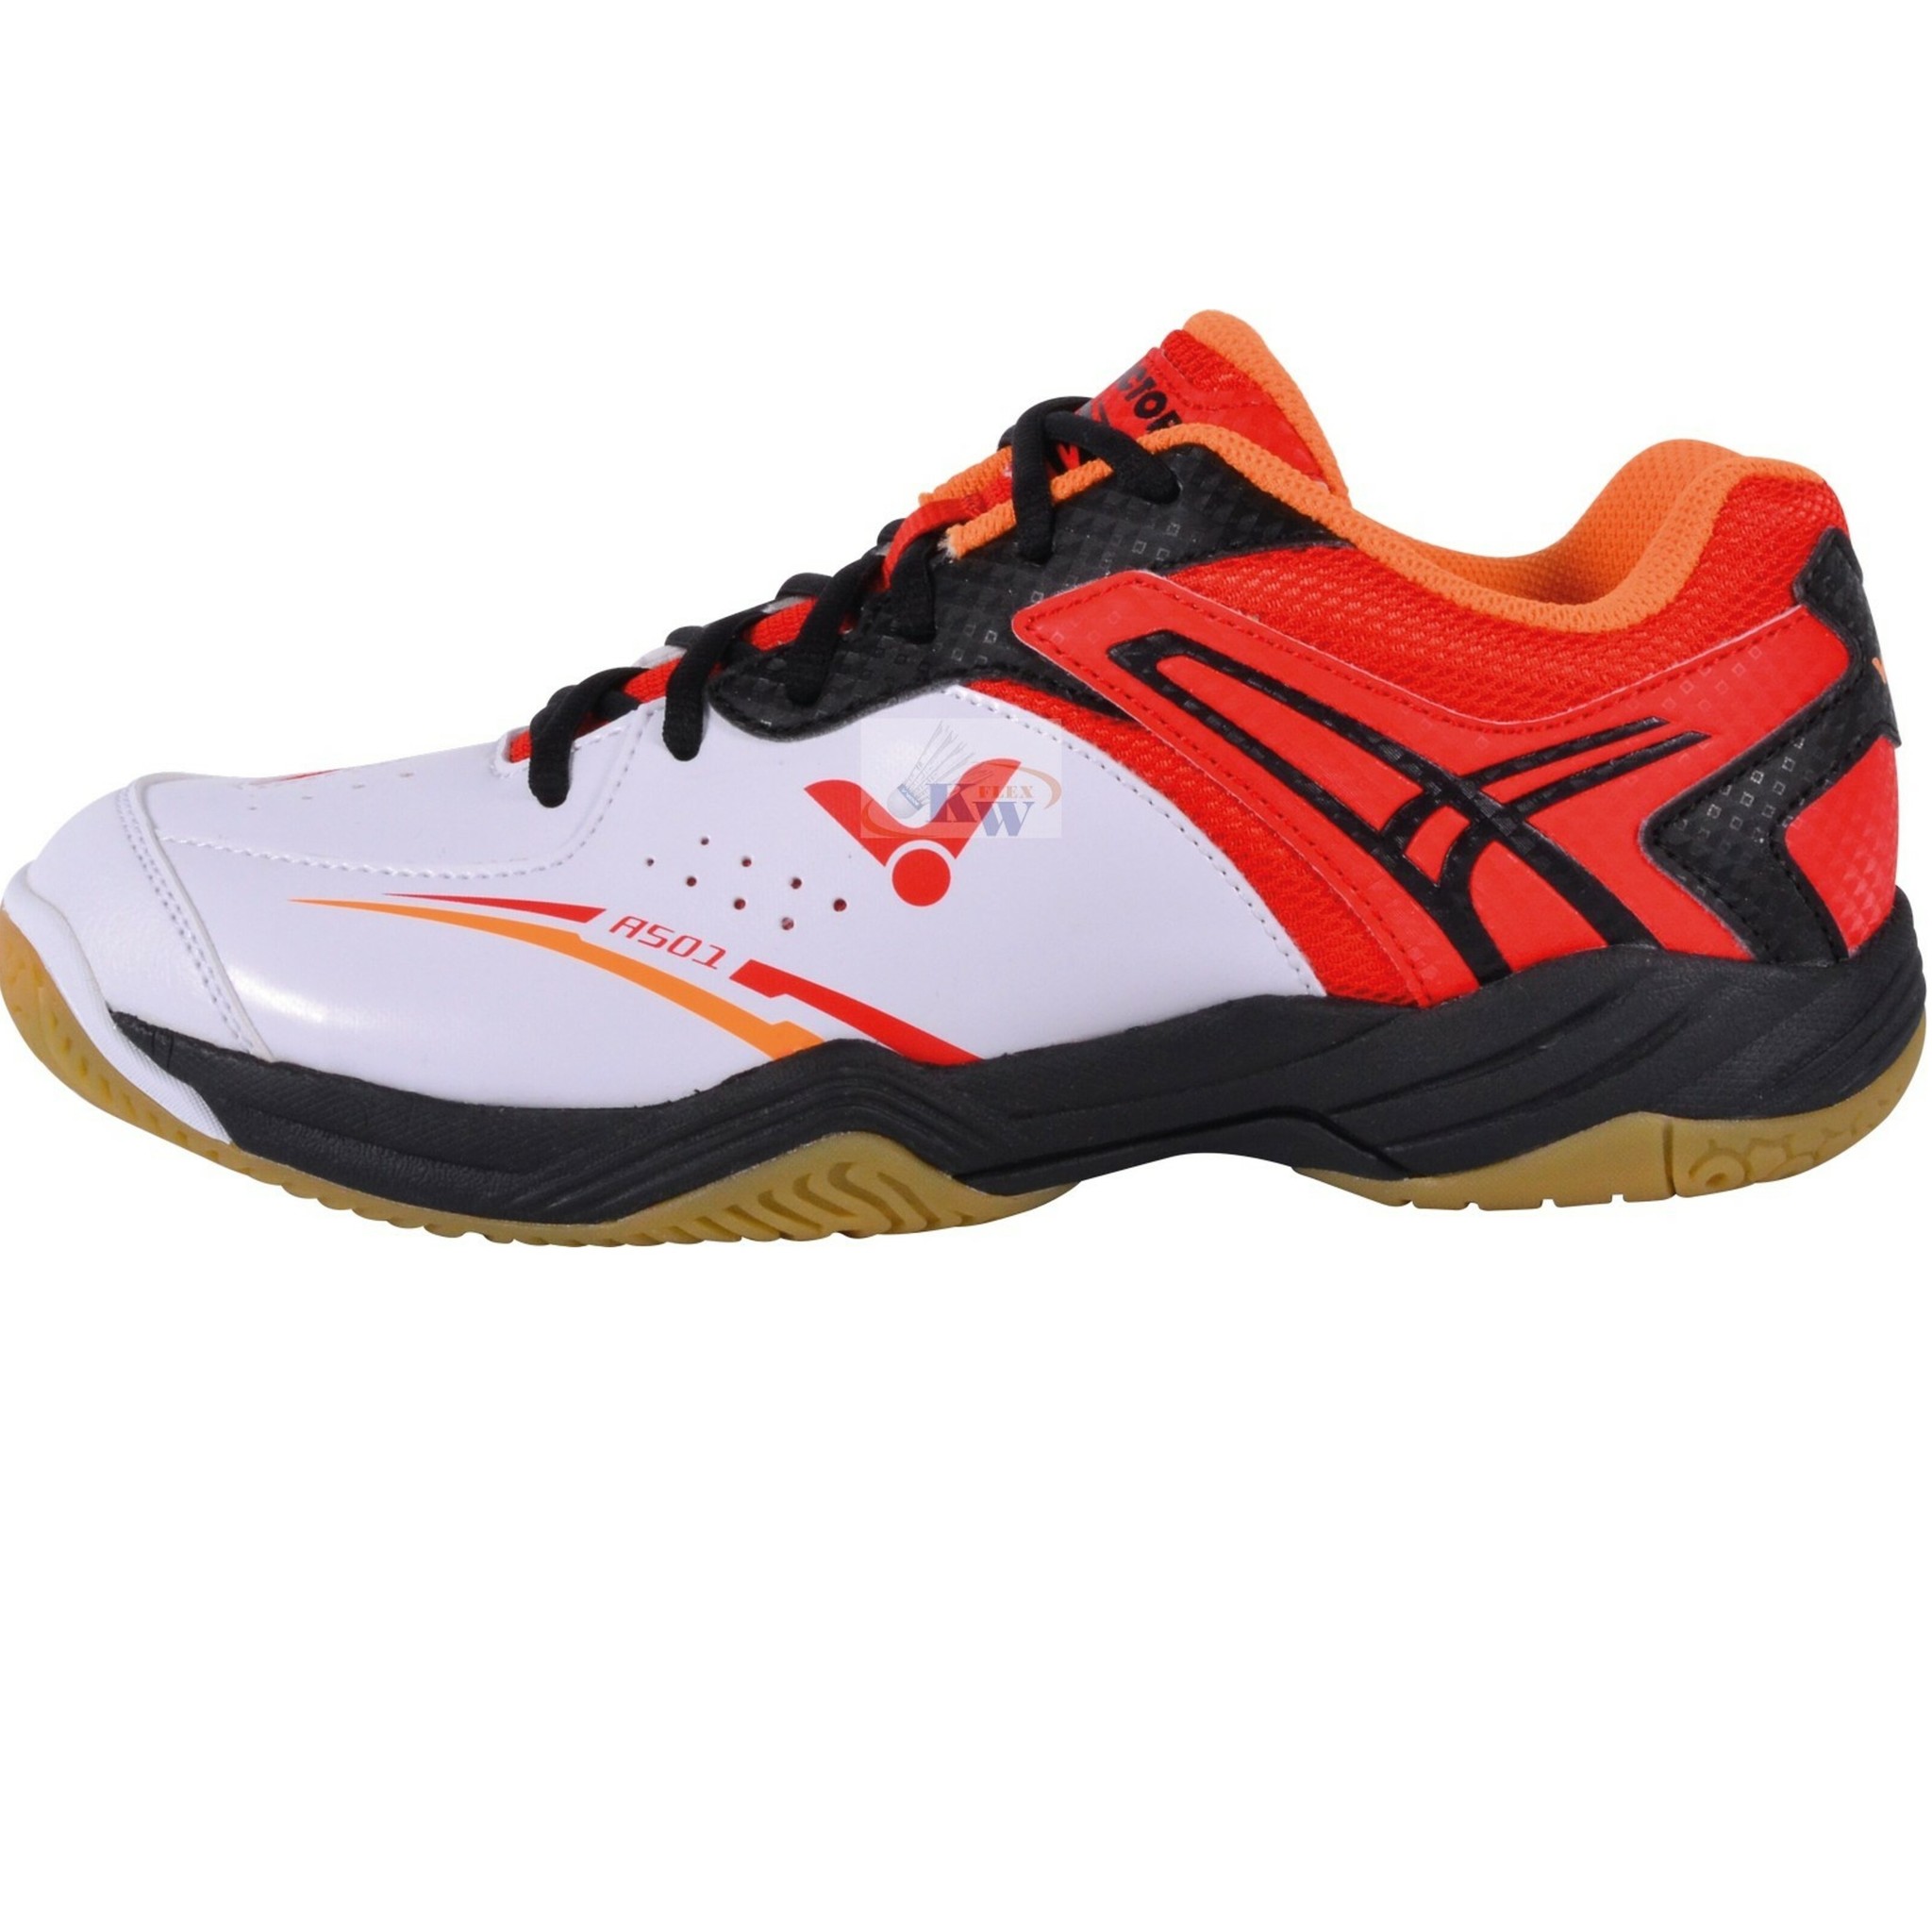 NEW Victor Indoor Court A501 Shoes for Badminton Squash White/Red >>REDUCED<< 